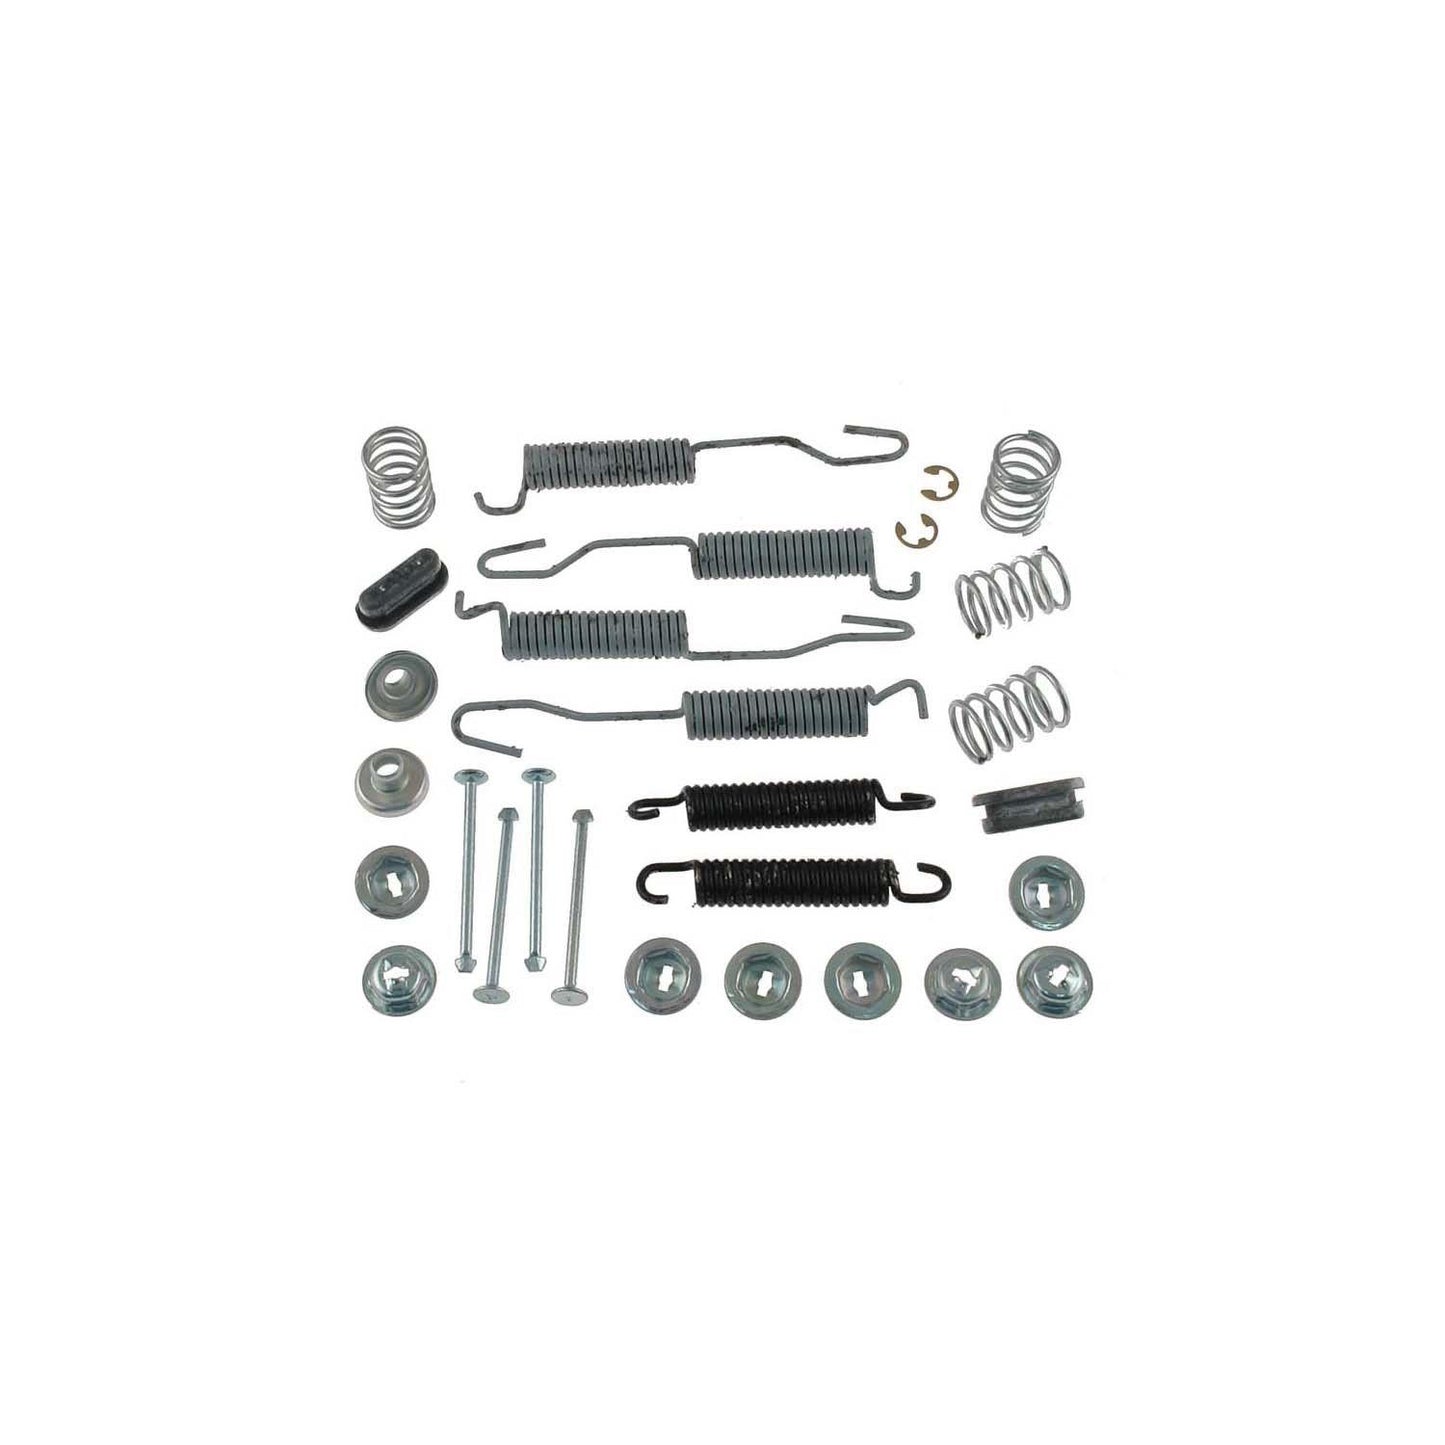 Corvette Brake shoe kit REAR 1963-1965 includes shoes cylinders and spring kit